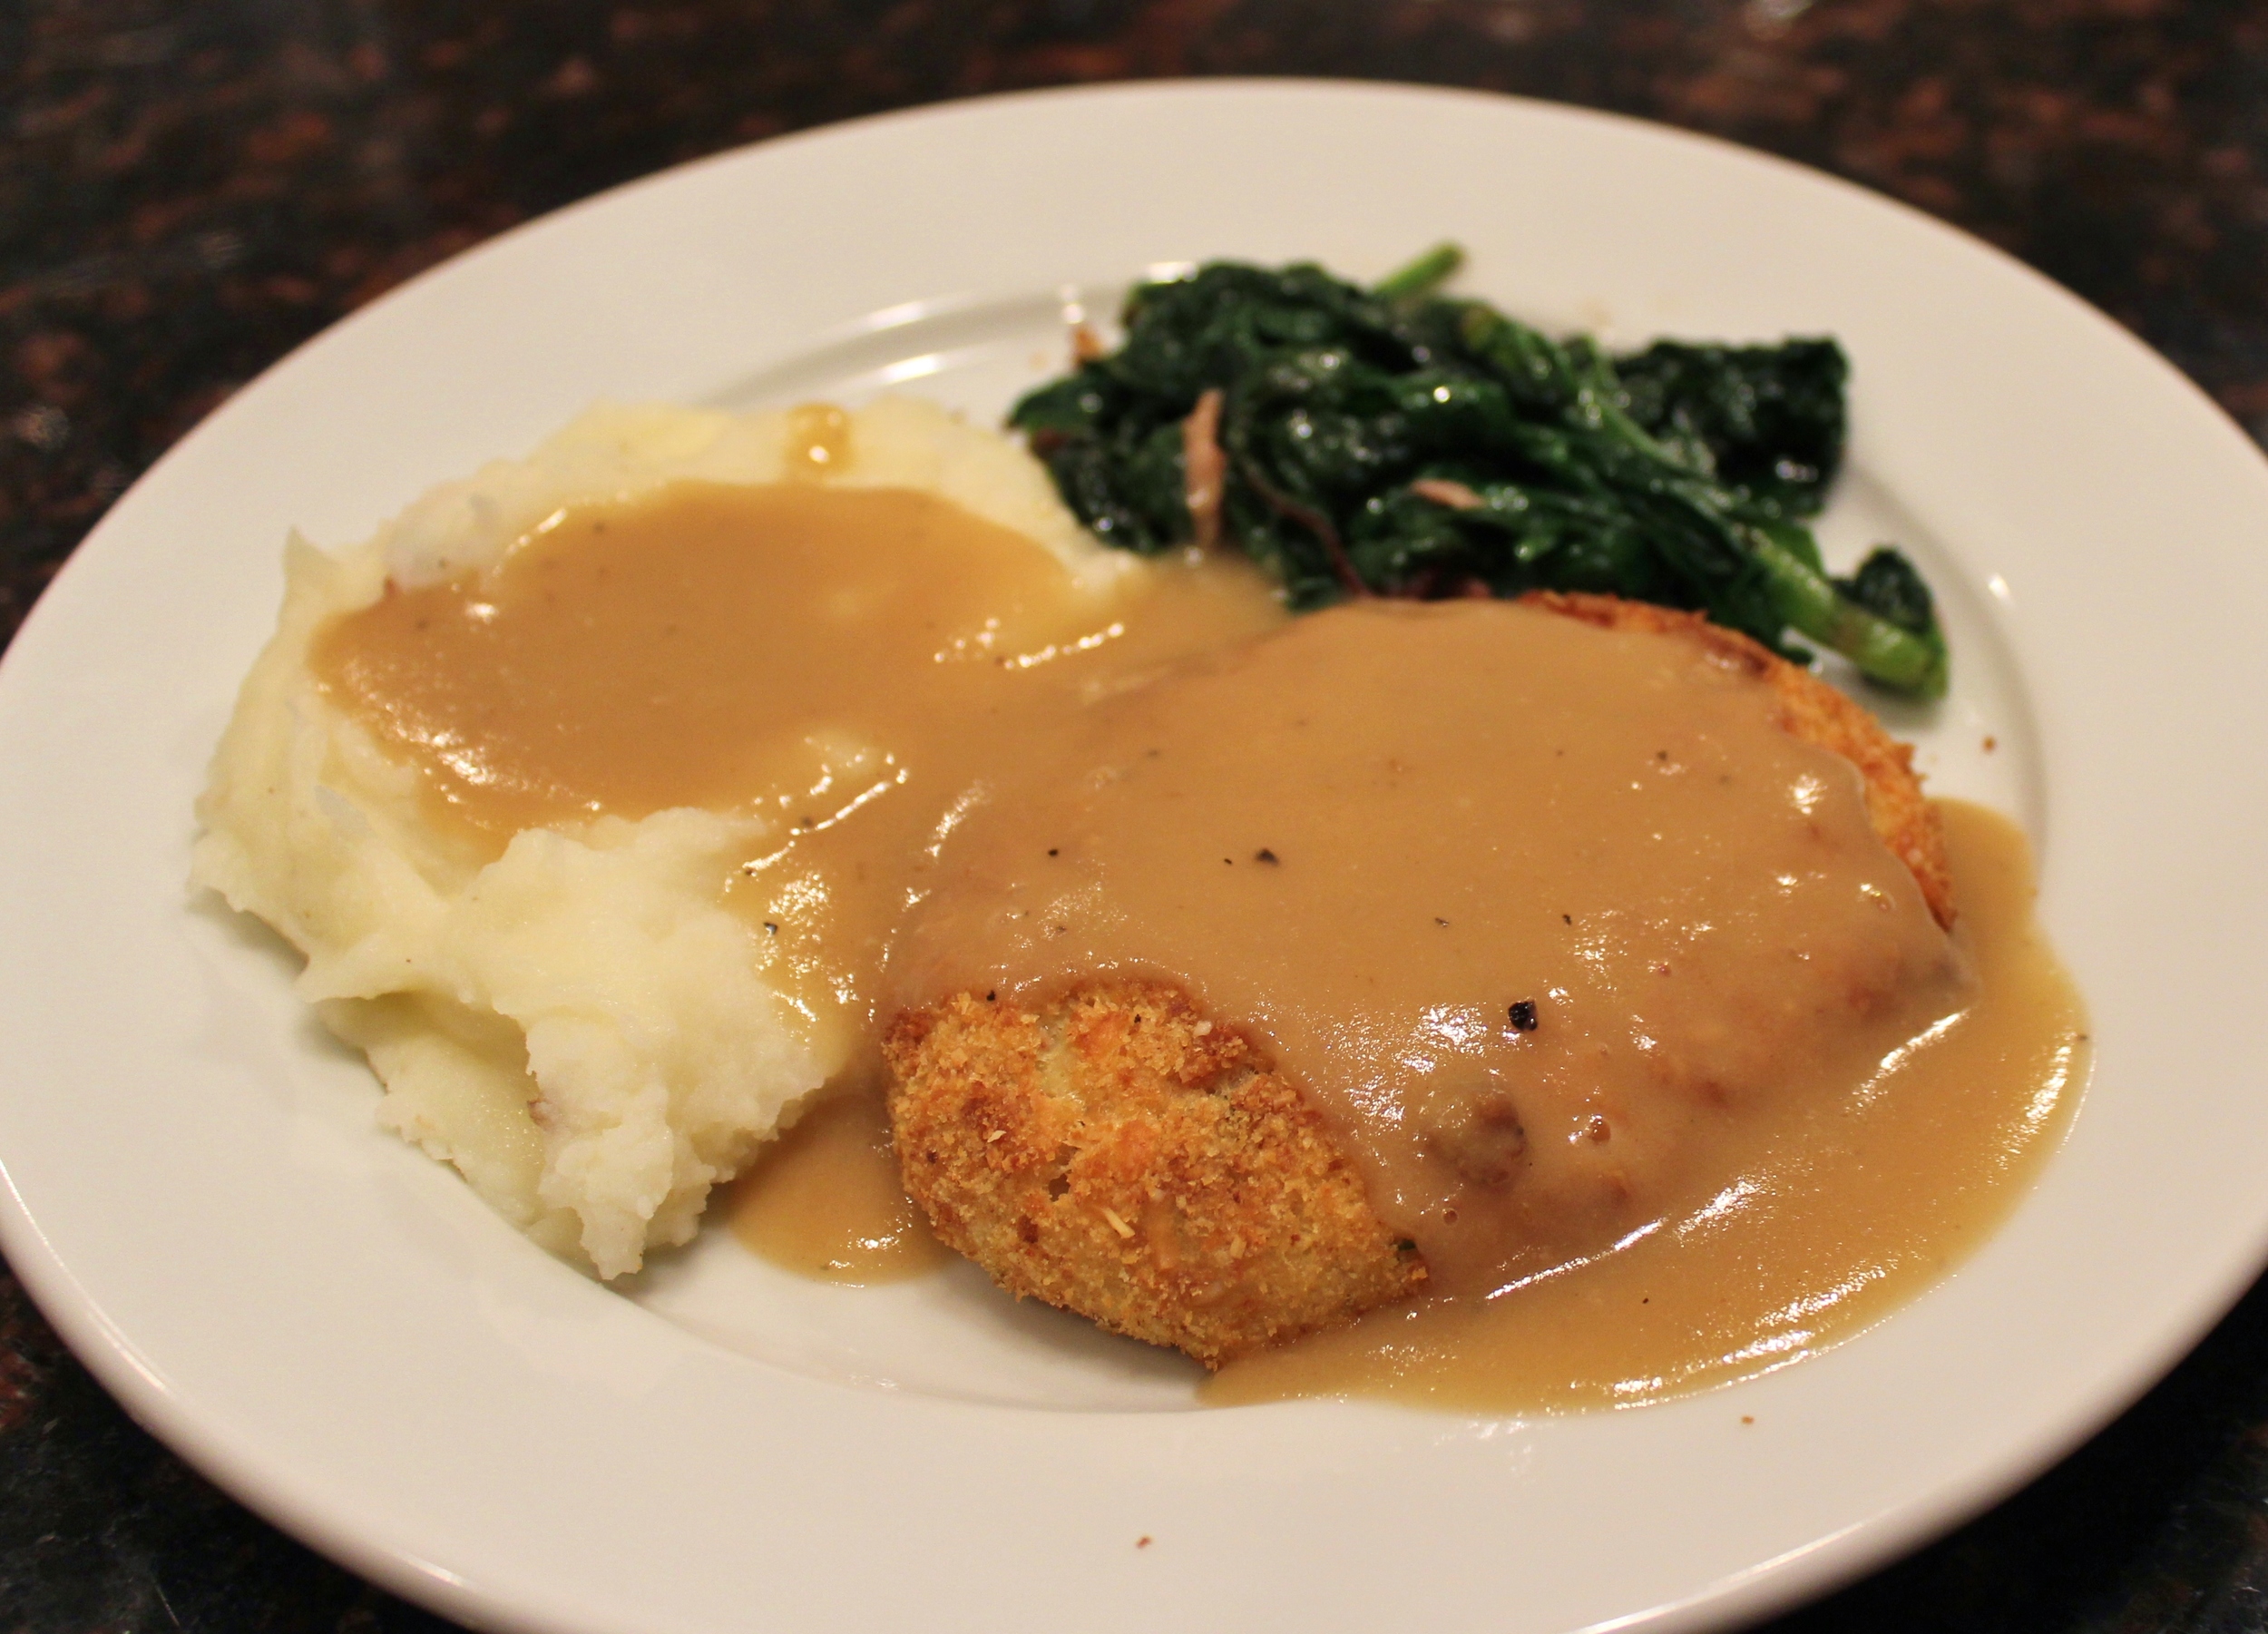 Chicken croquettes with mashed potatoes and spinach from the garden